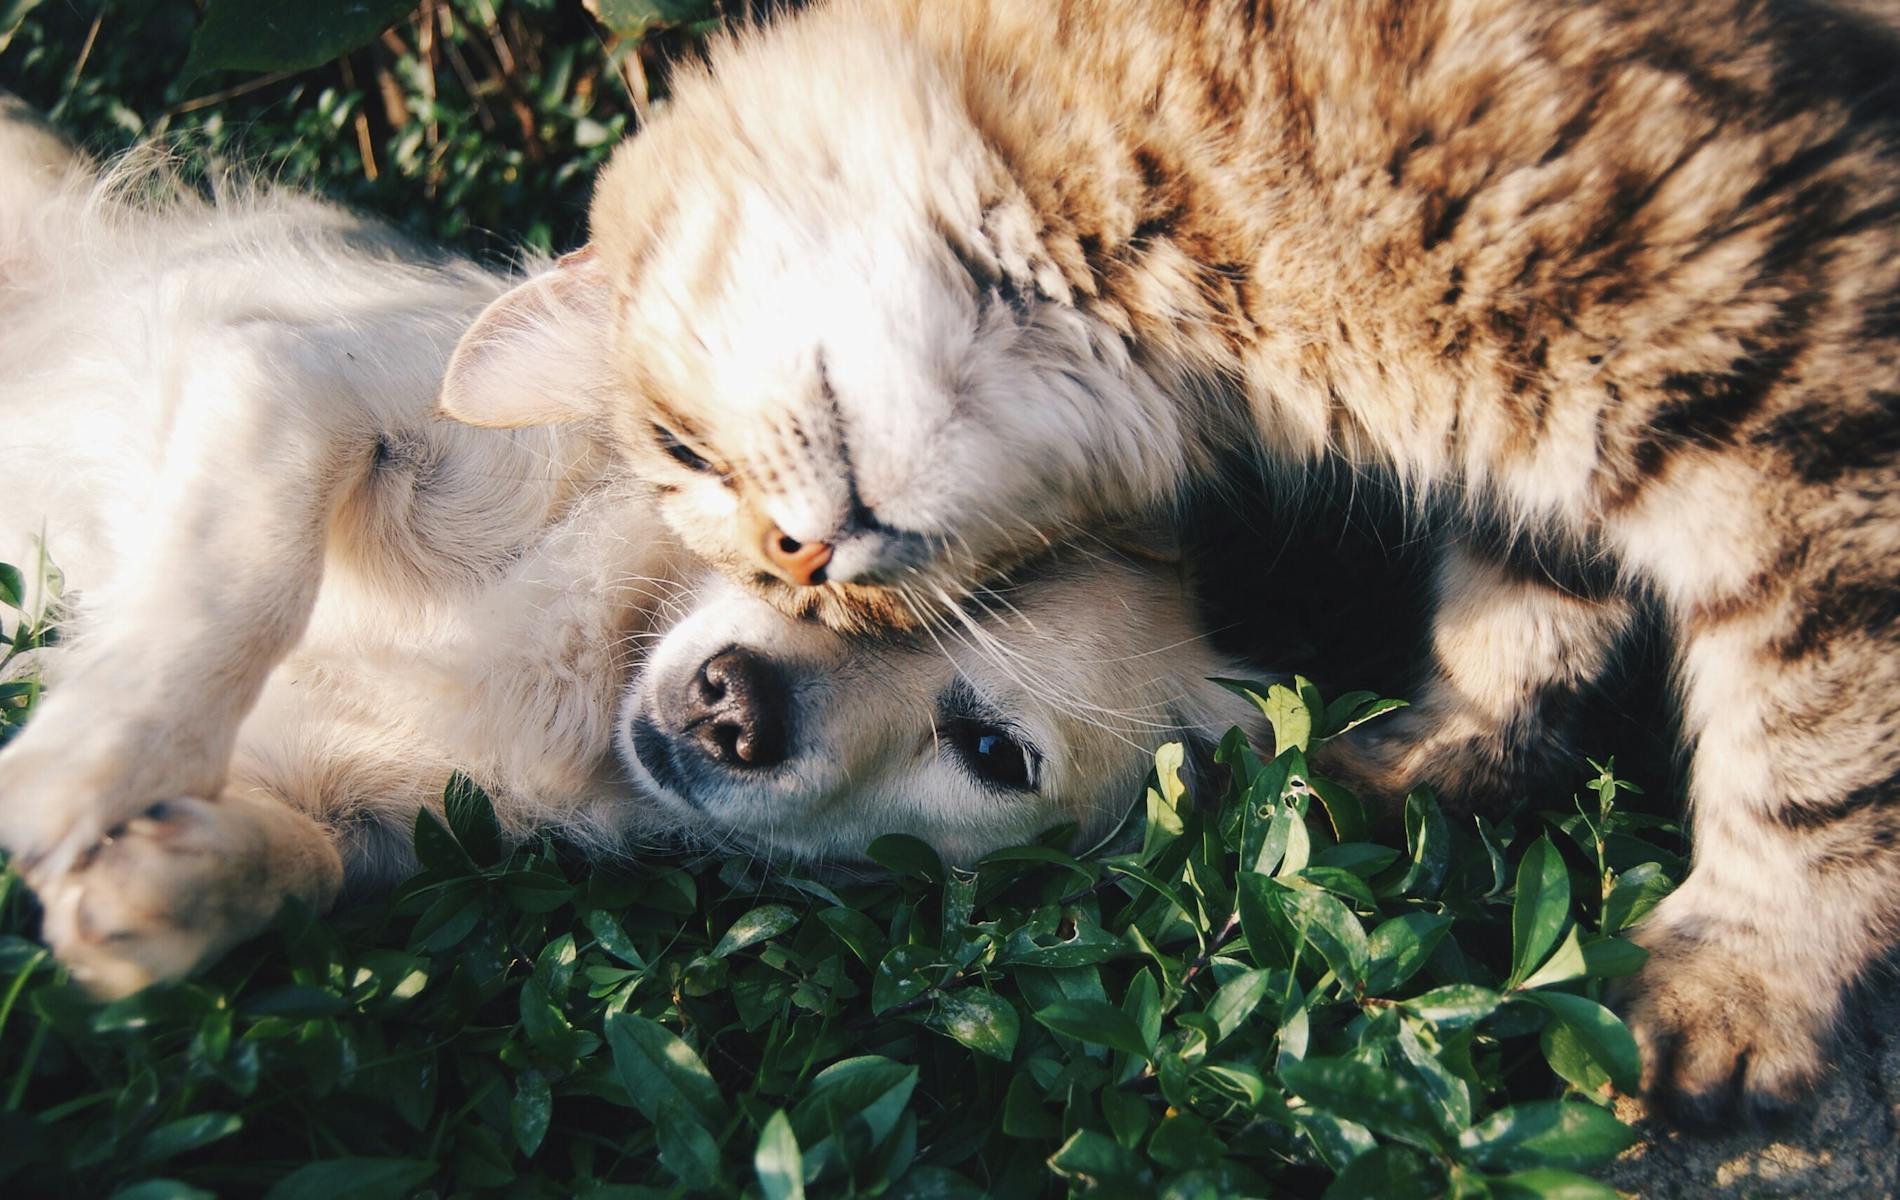 Cat and dog nuzzling